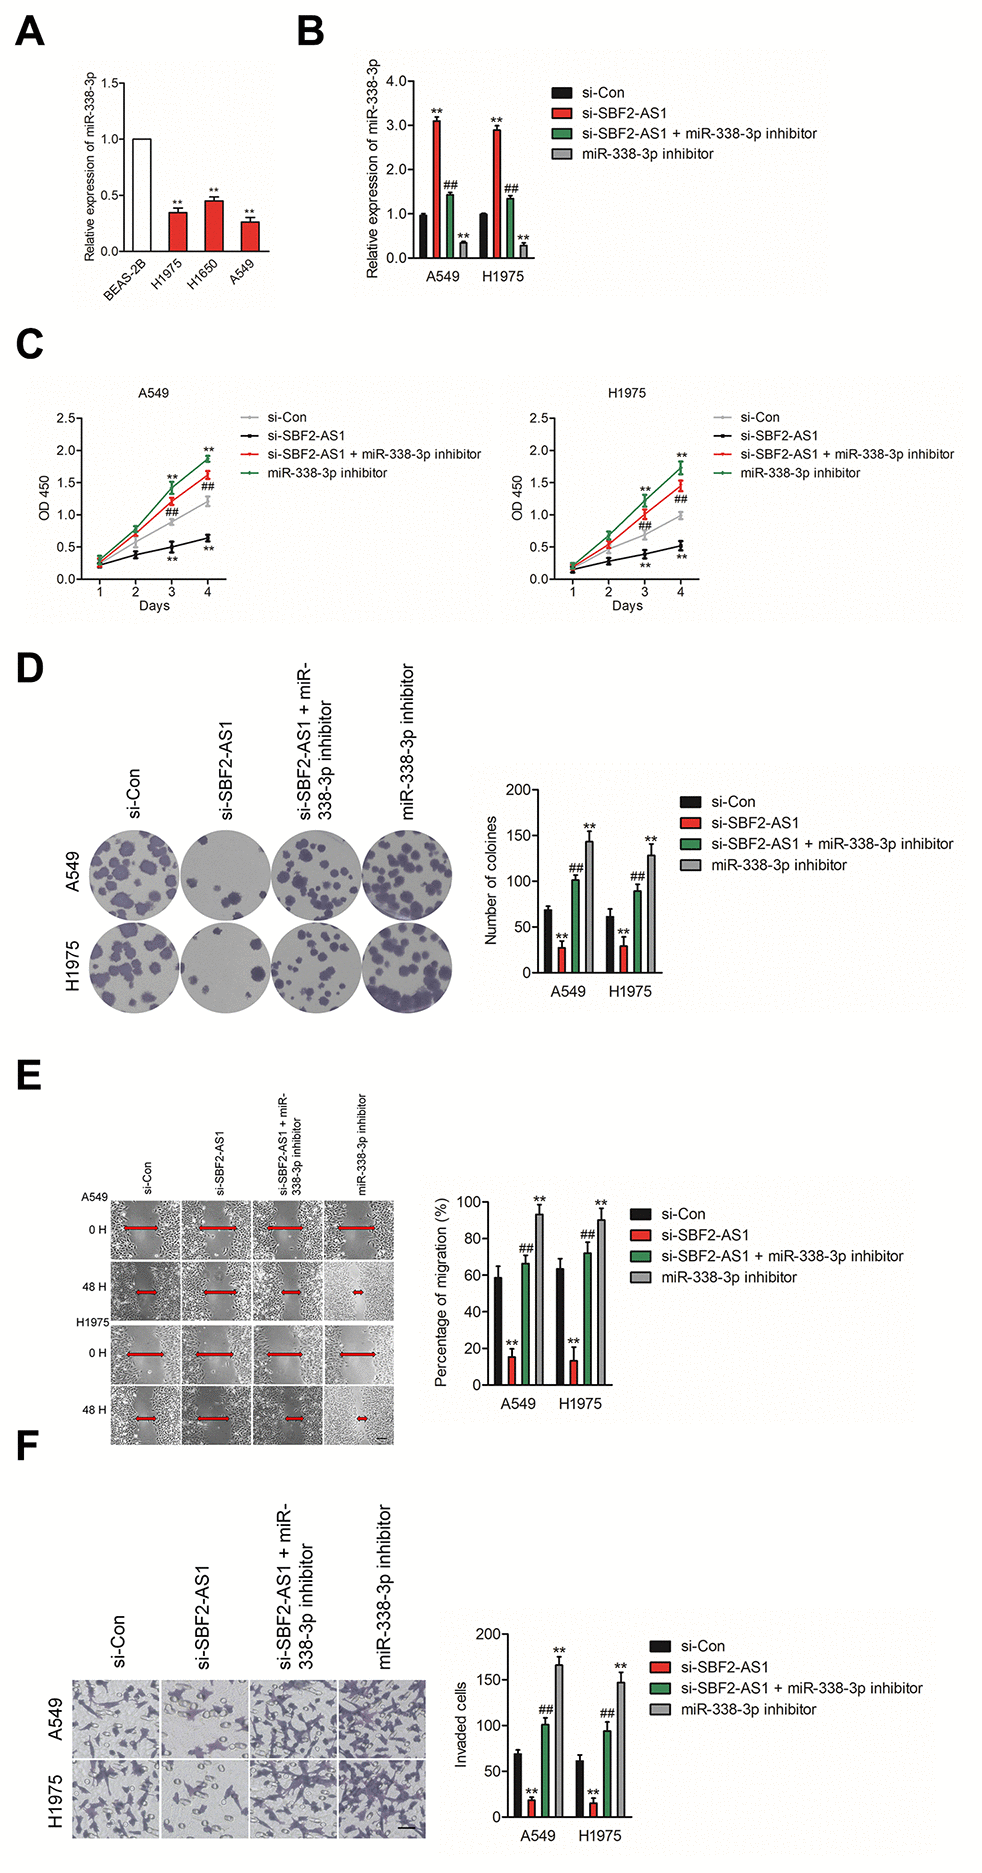 Knockdown of SBF2-AS1 suppresses NSCLC cell proliferation and invasion by targeting miR-338-3p. (A) qRT-PCR analysis of miR-338-3p expression in human bronchial epithelial cell BEAS-2B and NSCLC cell lines (A549, H1650 and H1975). **PB) A549 or H1975 cell was transfected with si-Con, si-SBF2-AS1 or si-SBF2-AS1 and miR-338-3p inhibitor. The expression levels of miR-338-3p in different groups were analyzed by qRT-PCR. (C) Cell proliferation activity of A549 or H1975 cell was assessed by CCK-8 assay. (D) Cell proliferation activity of A549 or H1975 cell was assessed by cell colony formation assay. (E) Cell migration ability of A549 or H1975 cell in different groups was analyzed by wound healing assay. (F) Cell invasion ability of A549 or H1975 cell in different groups was analyzed by Transwell invasion assay. The data are presented as the mean ± SD. All in vitro data are representative of three independent experiments. **P##P